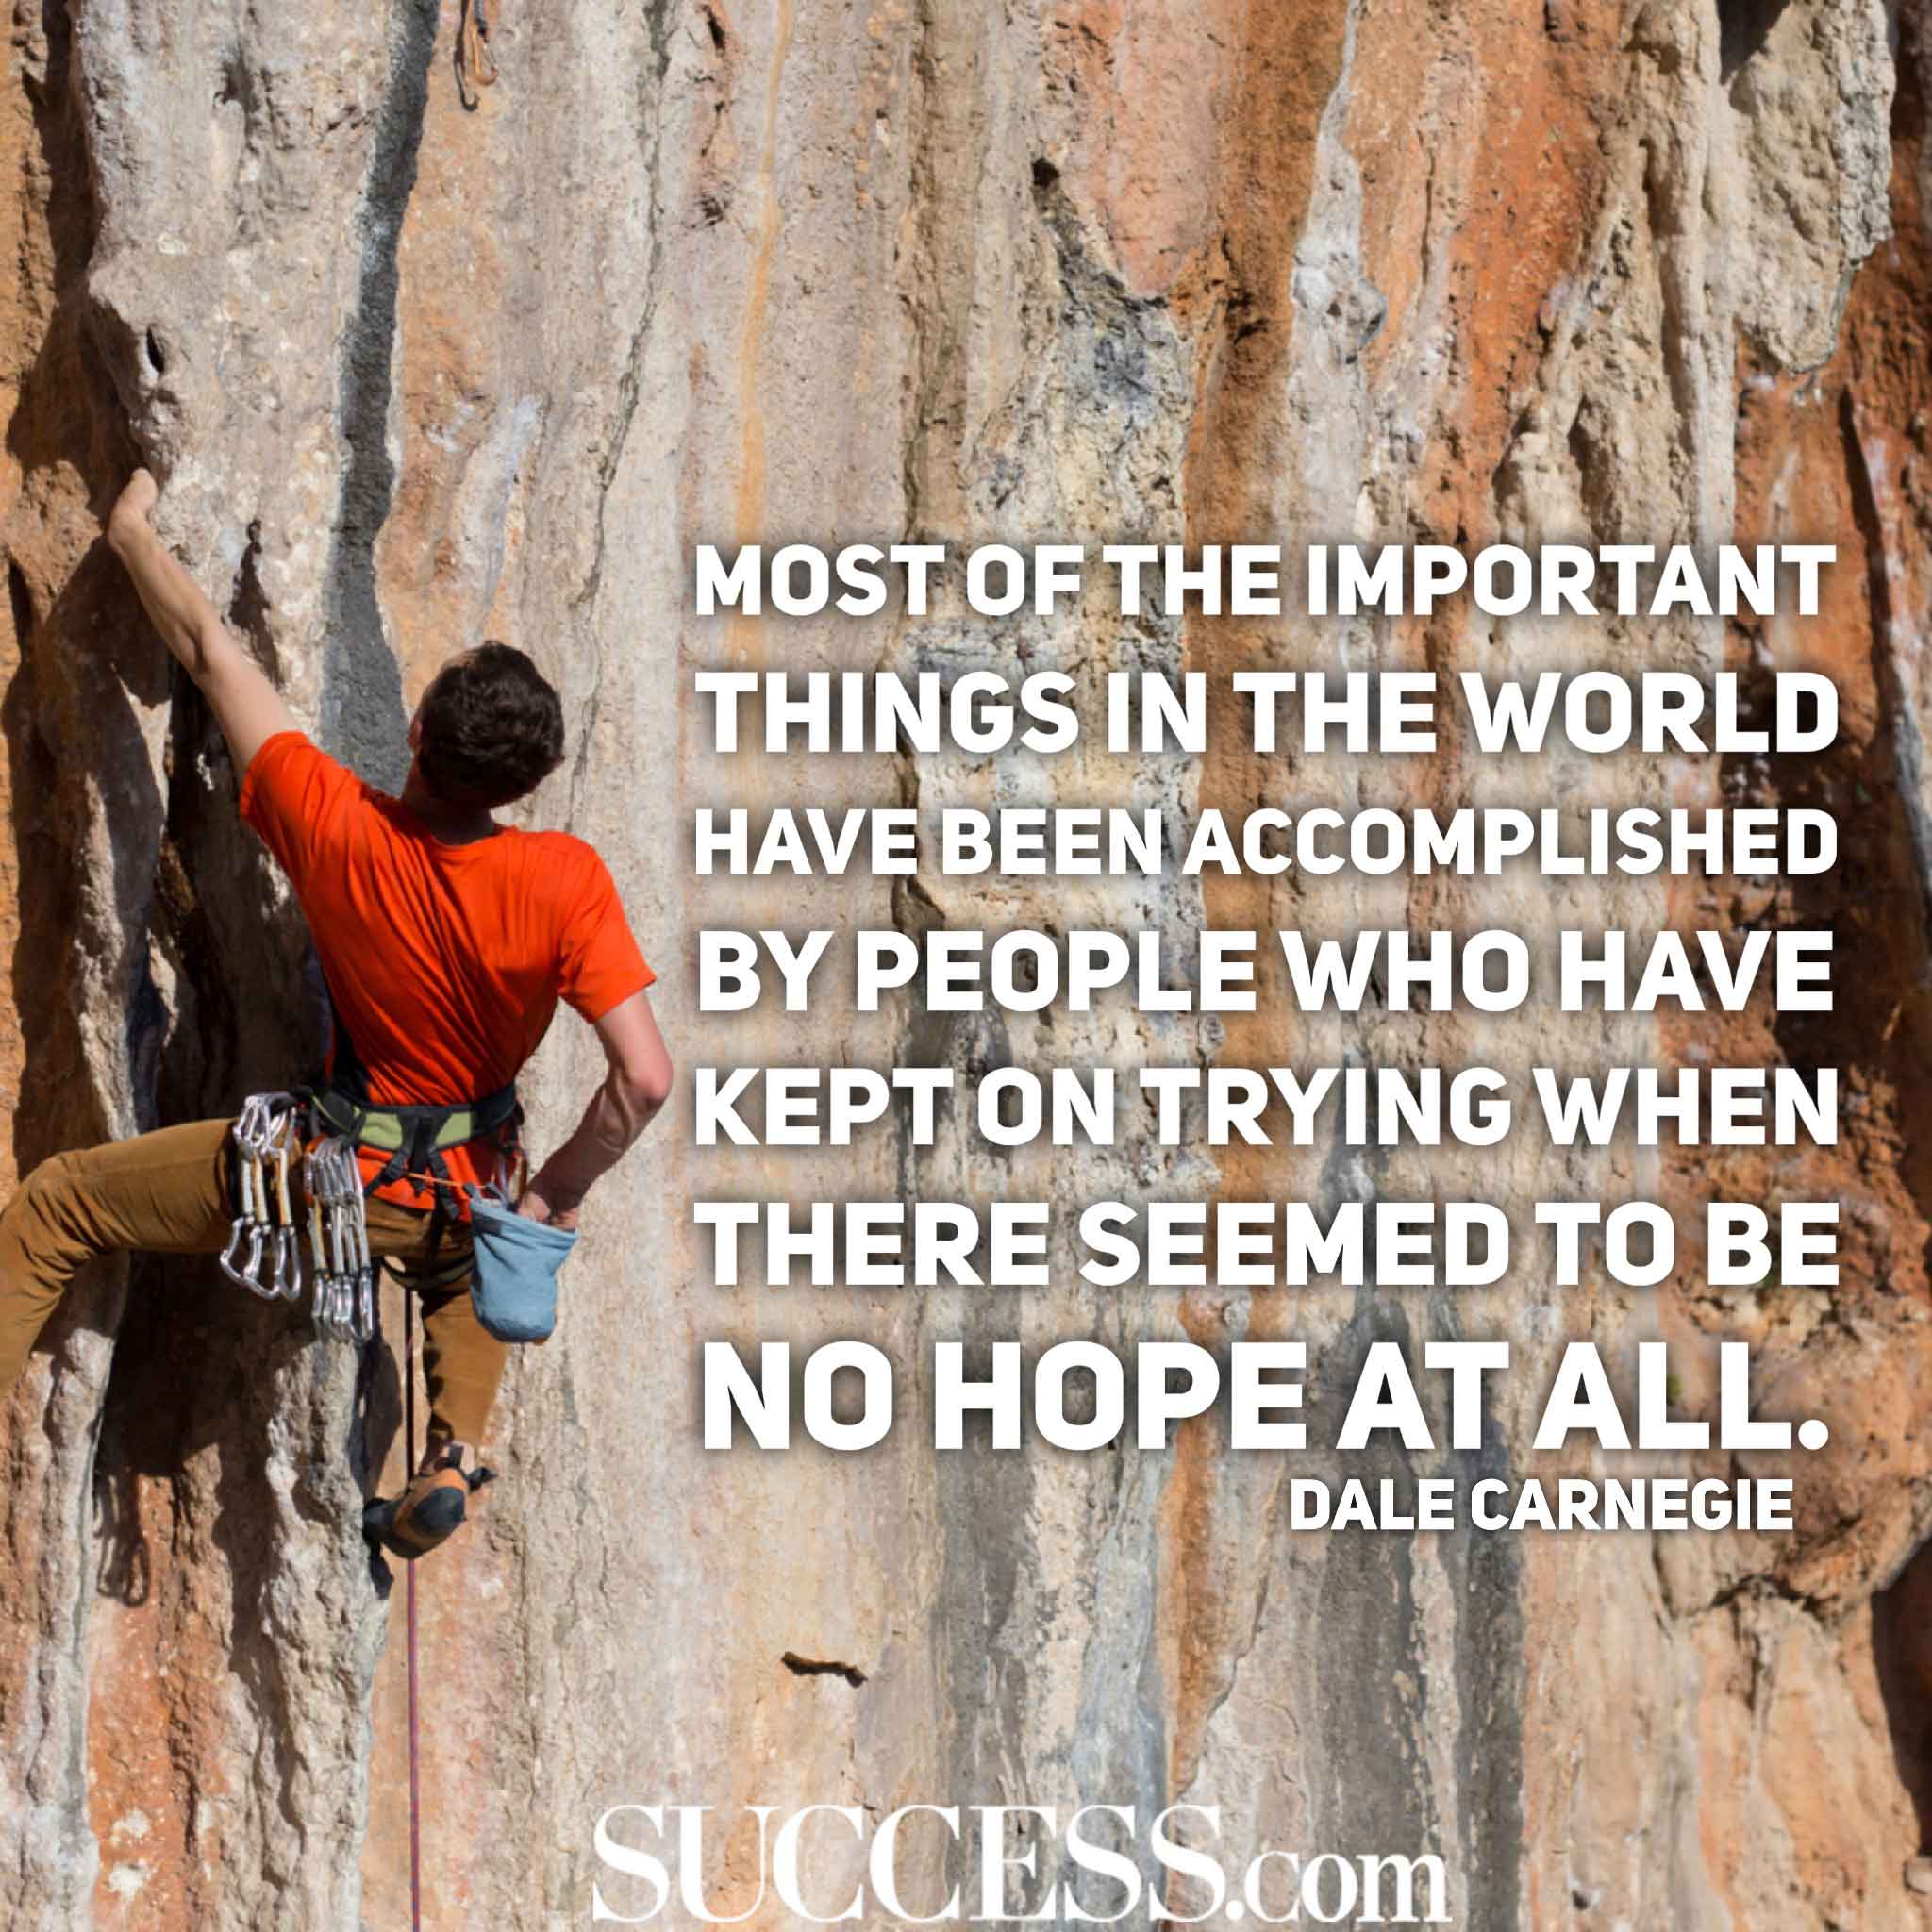 15 Inspiring Quotes About Never Giving Up